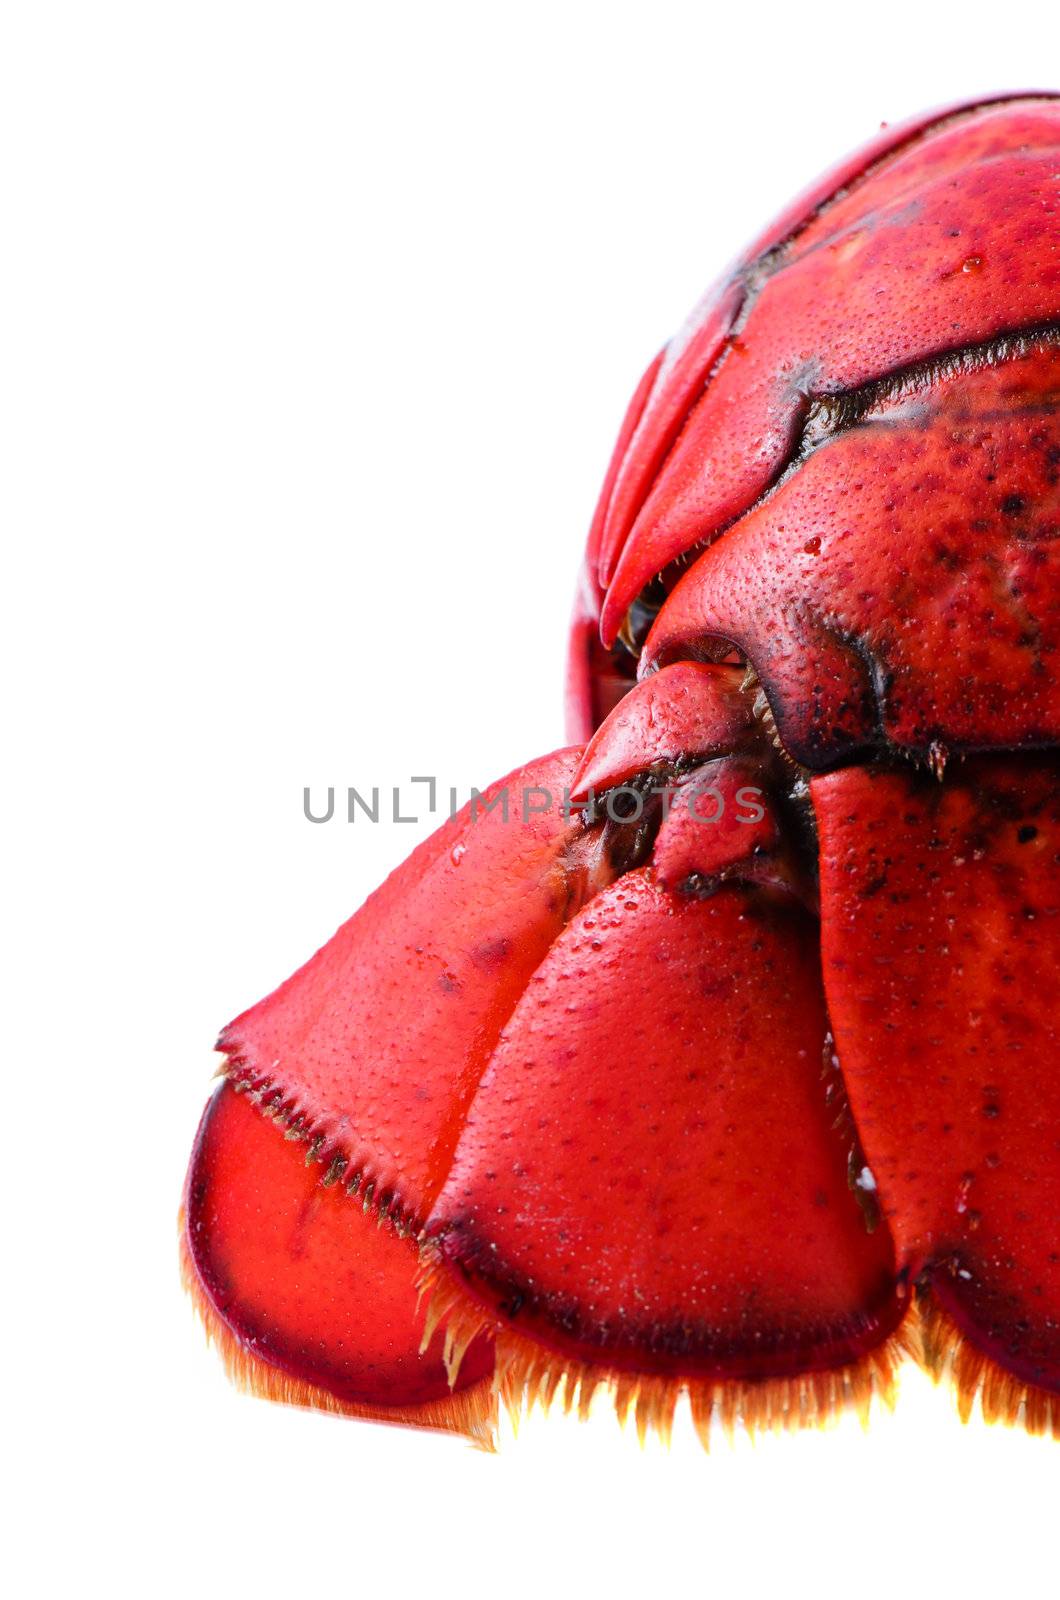 Tail of lobster on white background isolated